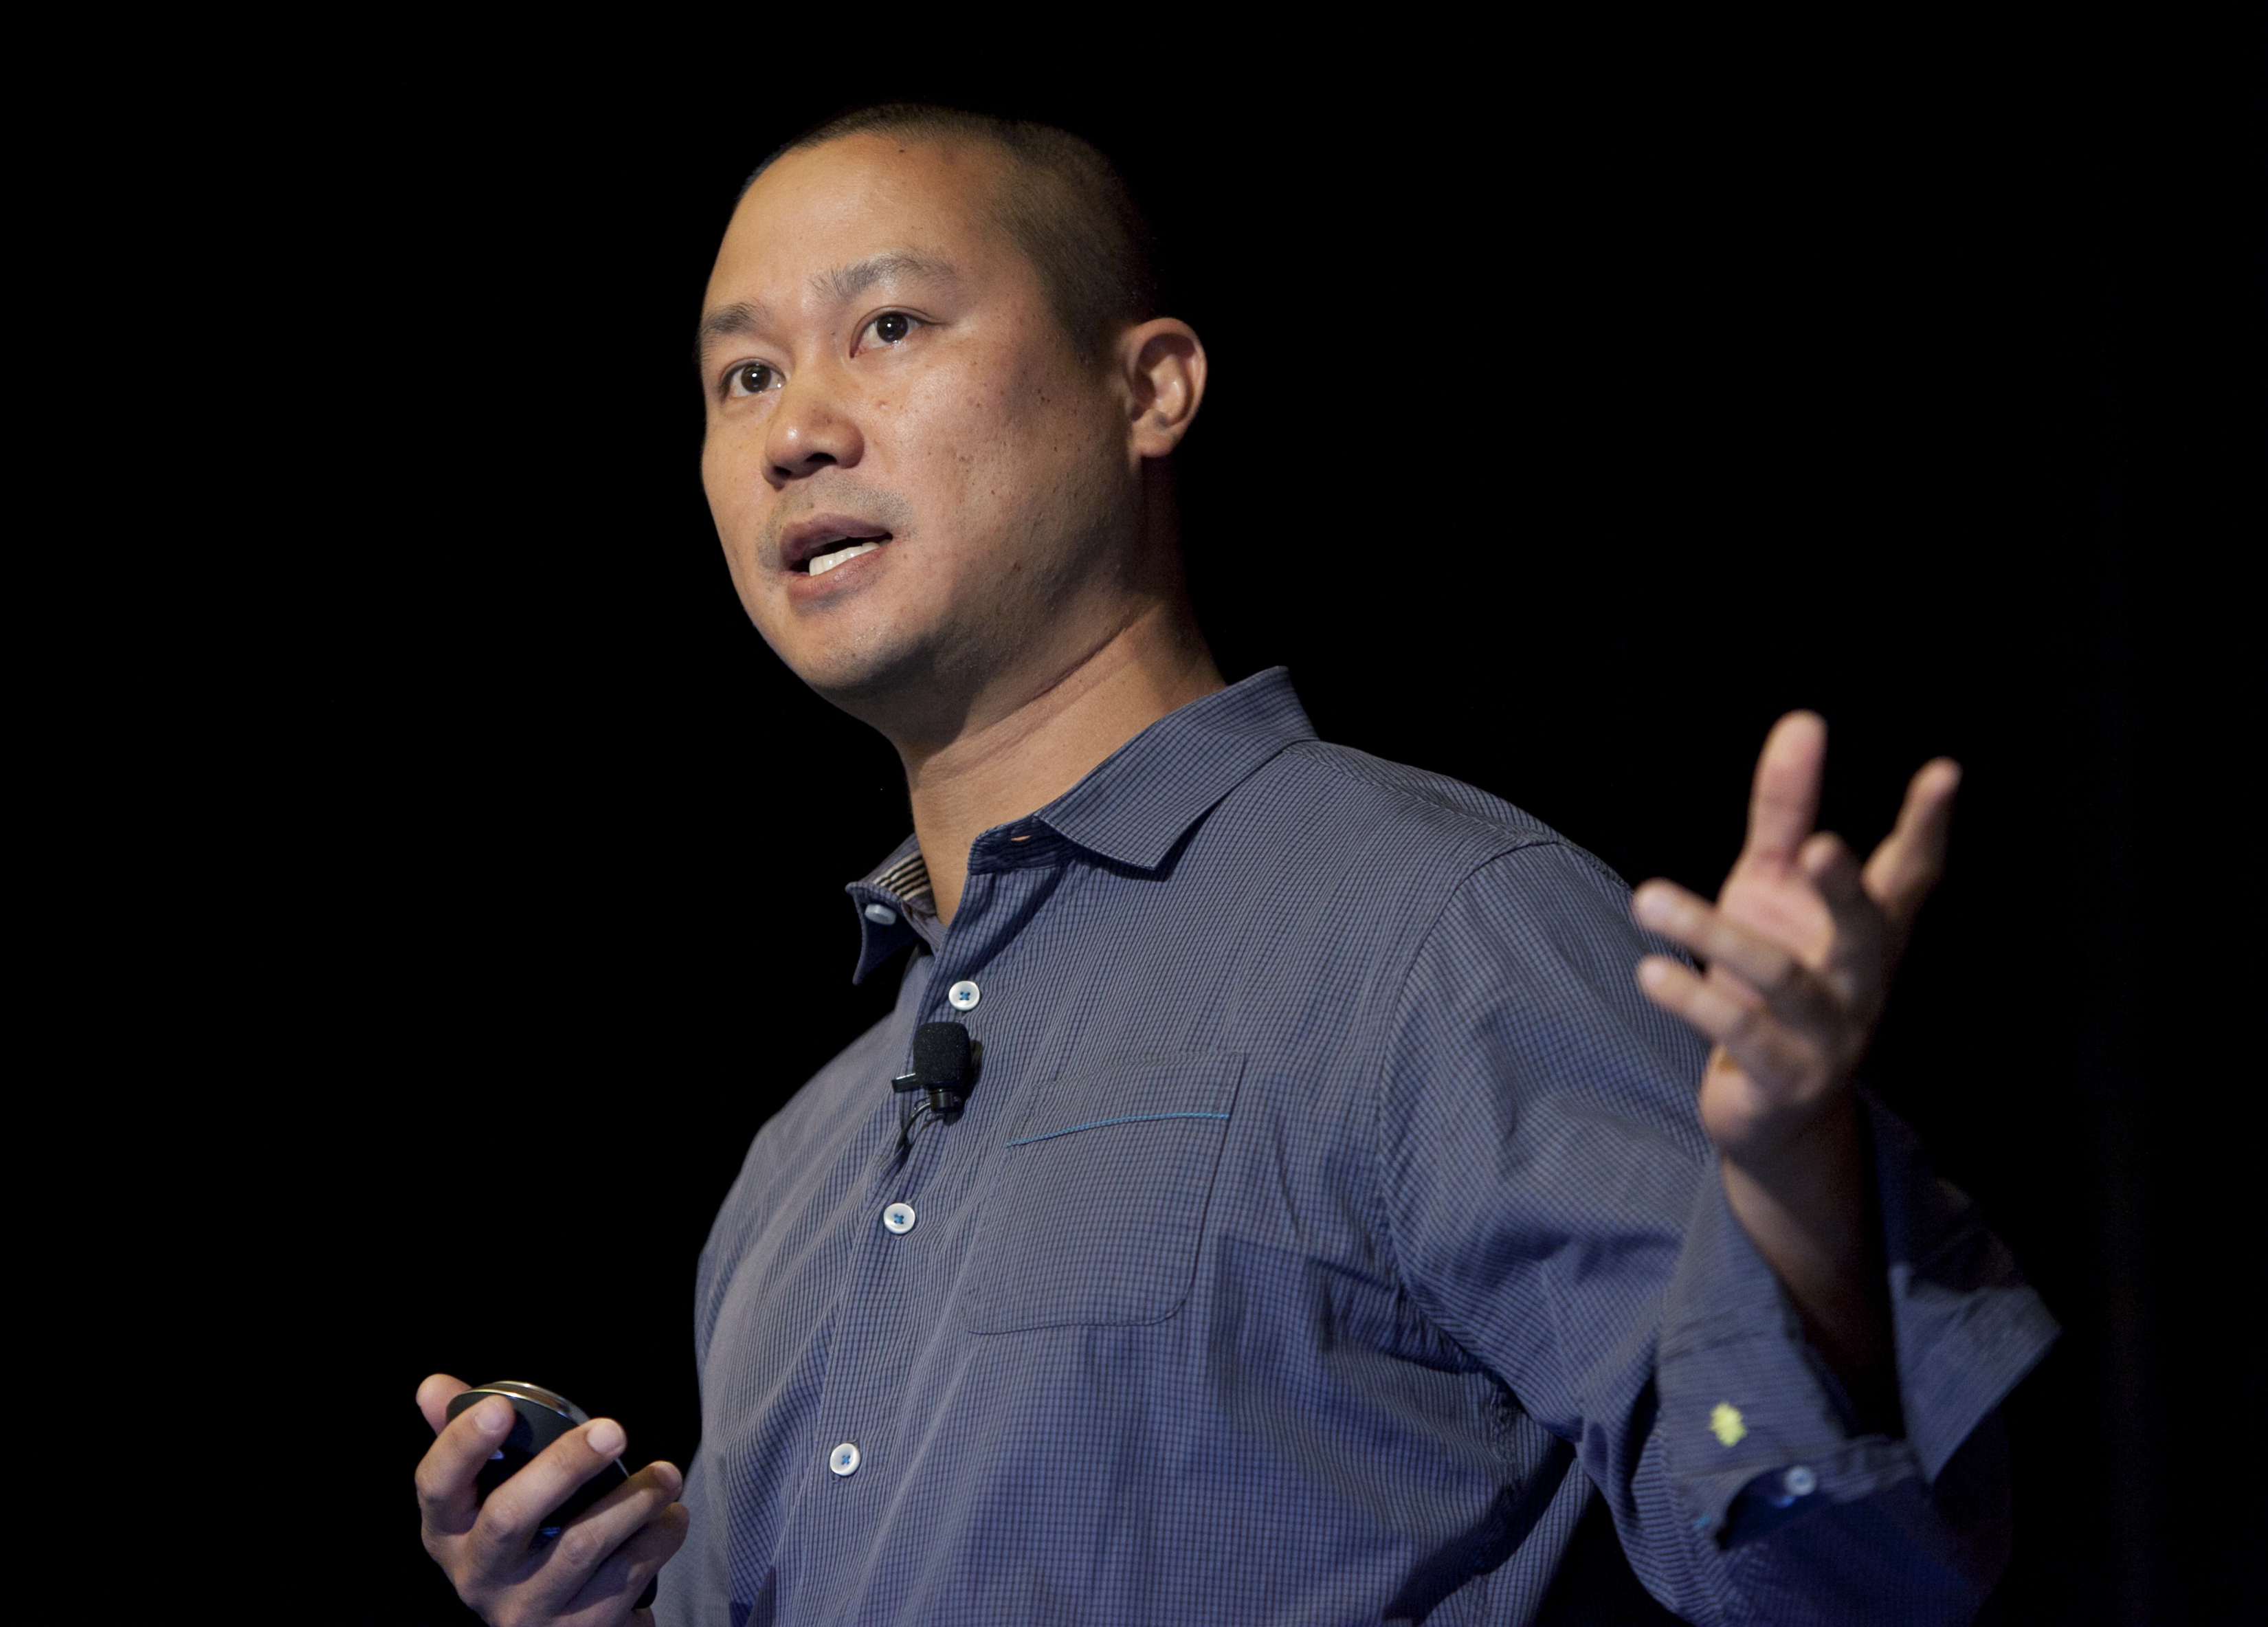 Tony Hsieh, retired Zappos CEO, dies at 46